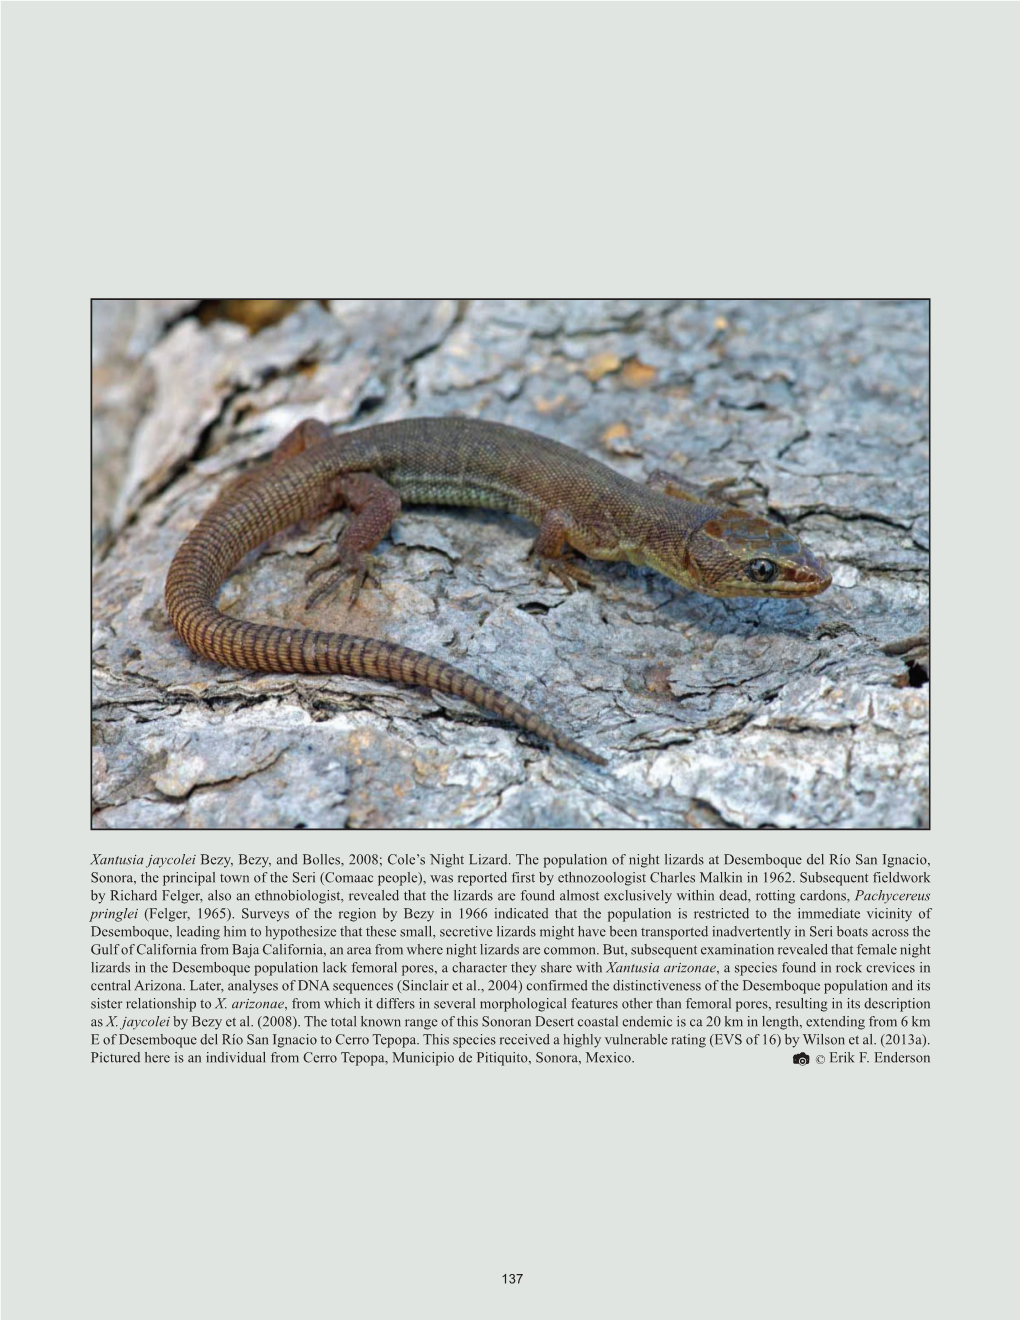 Sonoran Desert Herpetofauna Bezy Et Al. Xantusia Jaycolei Bezy, Bezy, and Bolles, 2008; Cole's Night Lizard. the Population Of